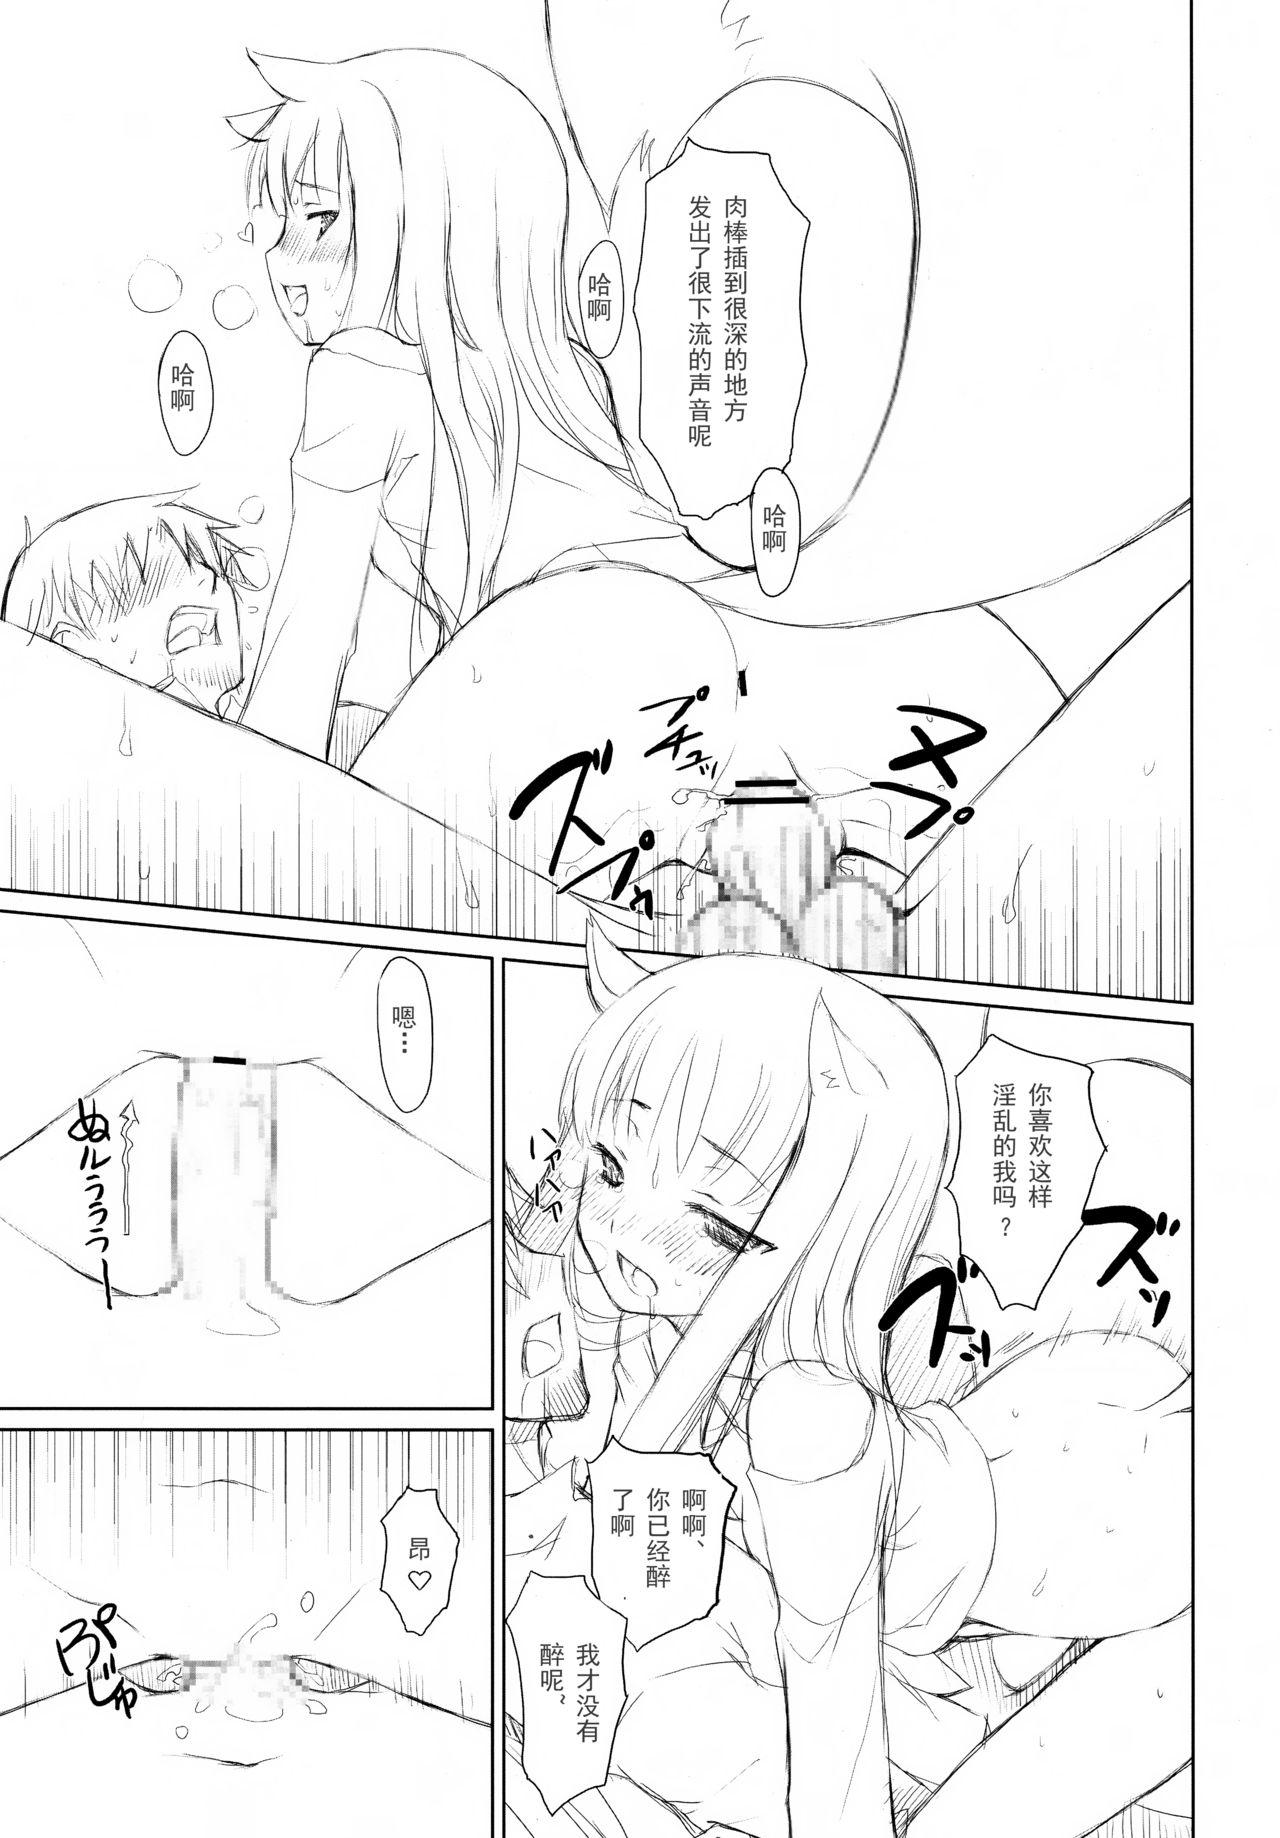 Amatuer Ookami to Gekishinryou - Spice and wolf Sharing - Page 12